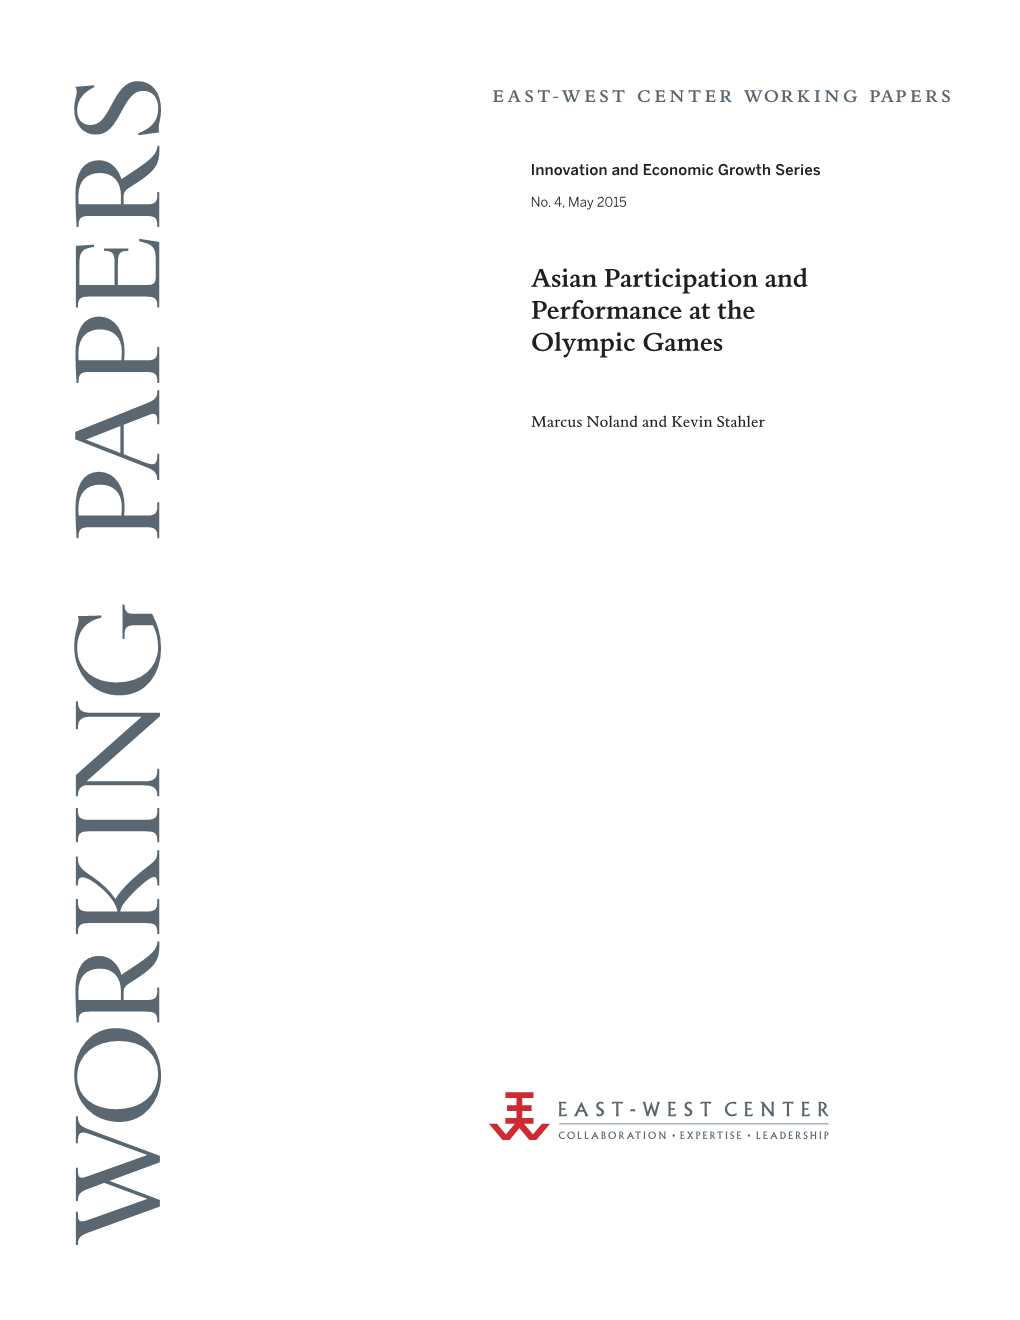 Asian Participation and Performance at the Olympic Games